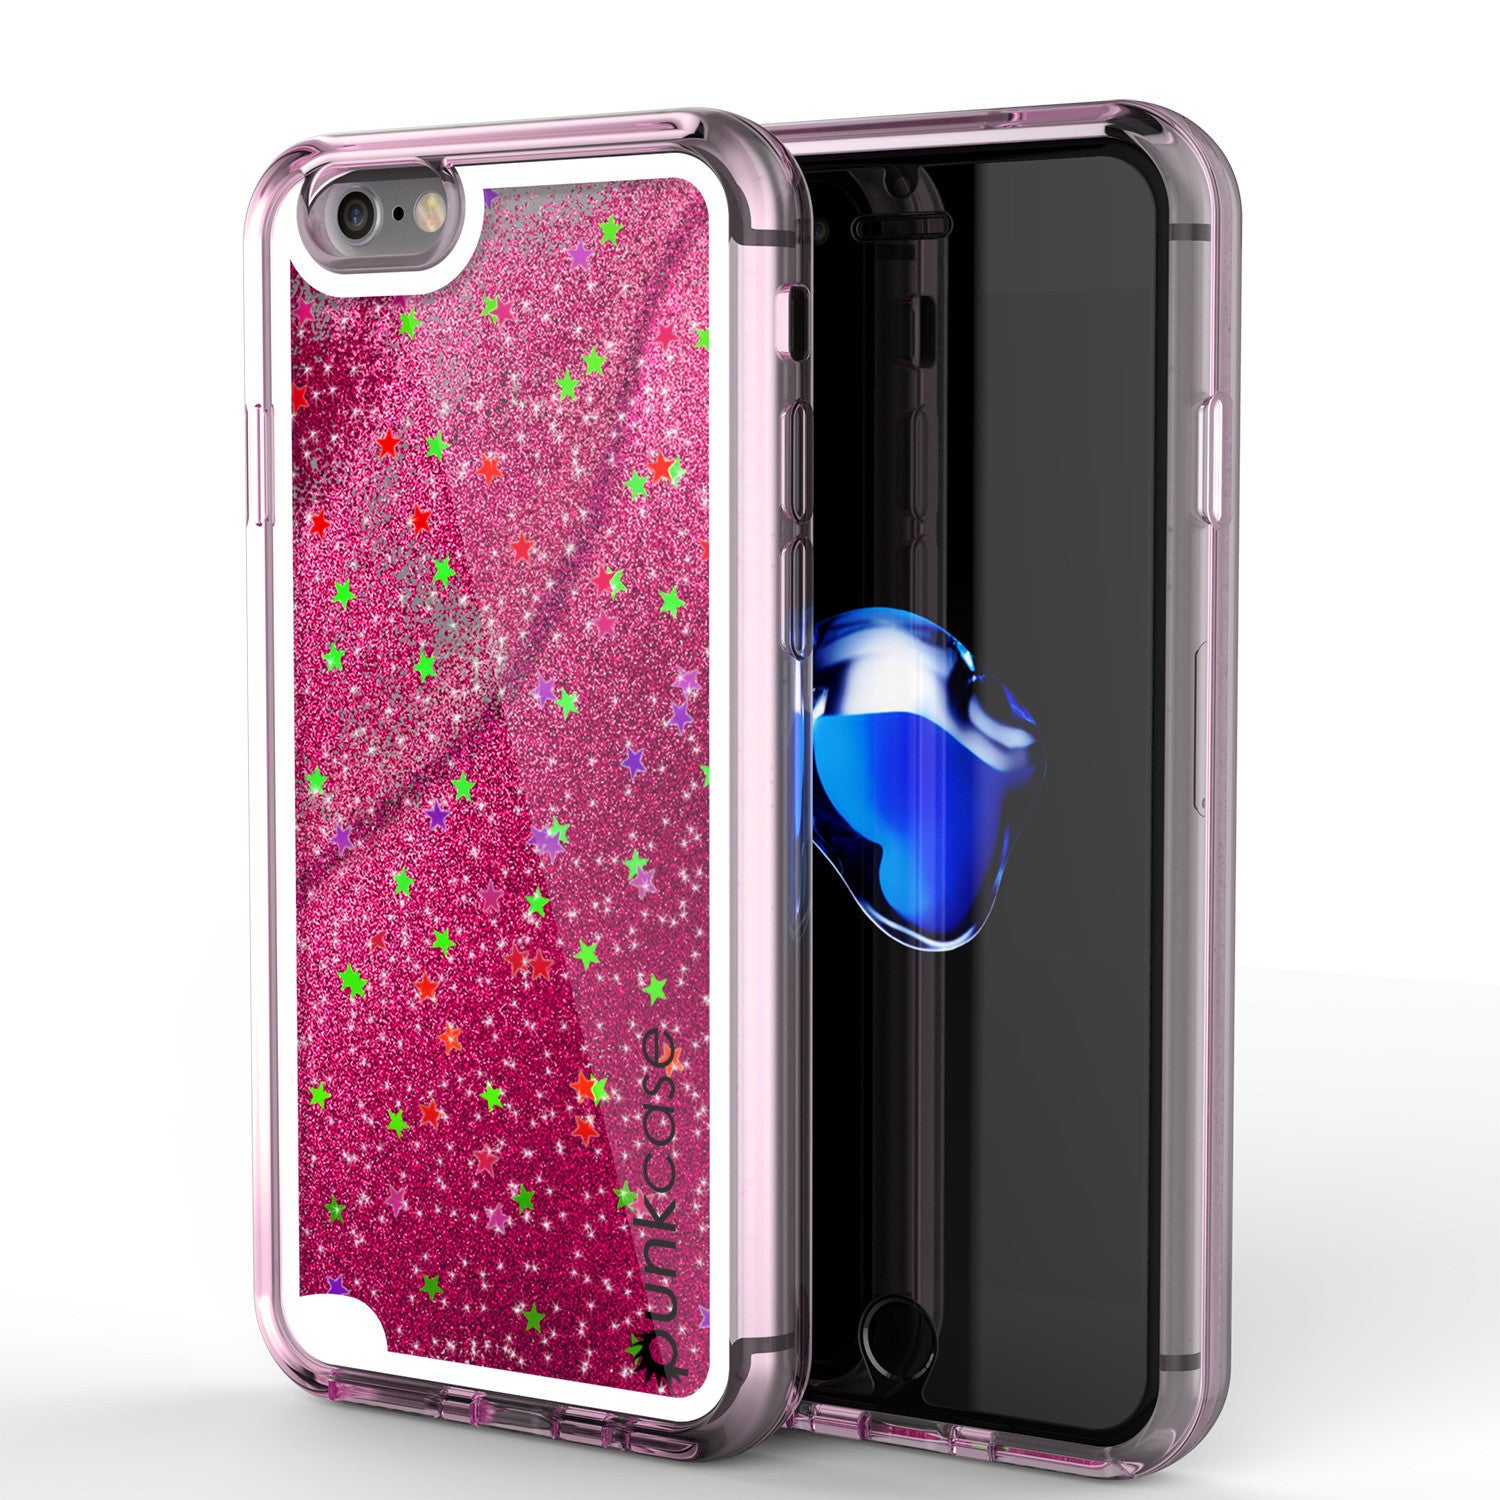 iPhone 7 Case, PunkCase LIQUID Pink Series, Protective Dual Layer Floating Glitter Cover (Color in image: pink)